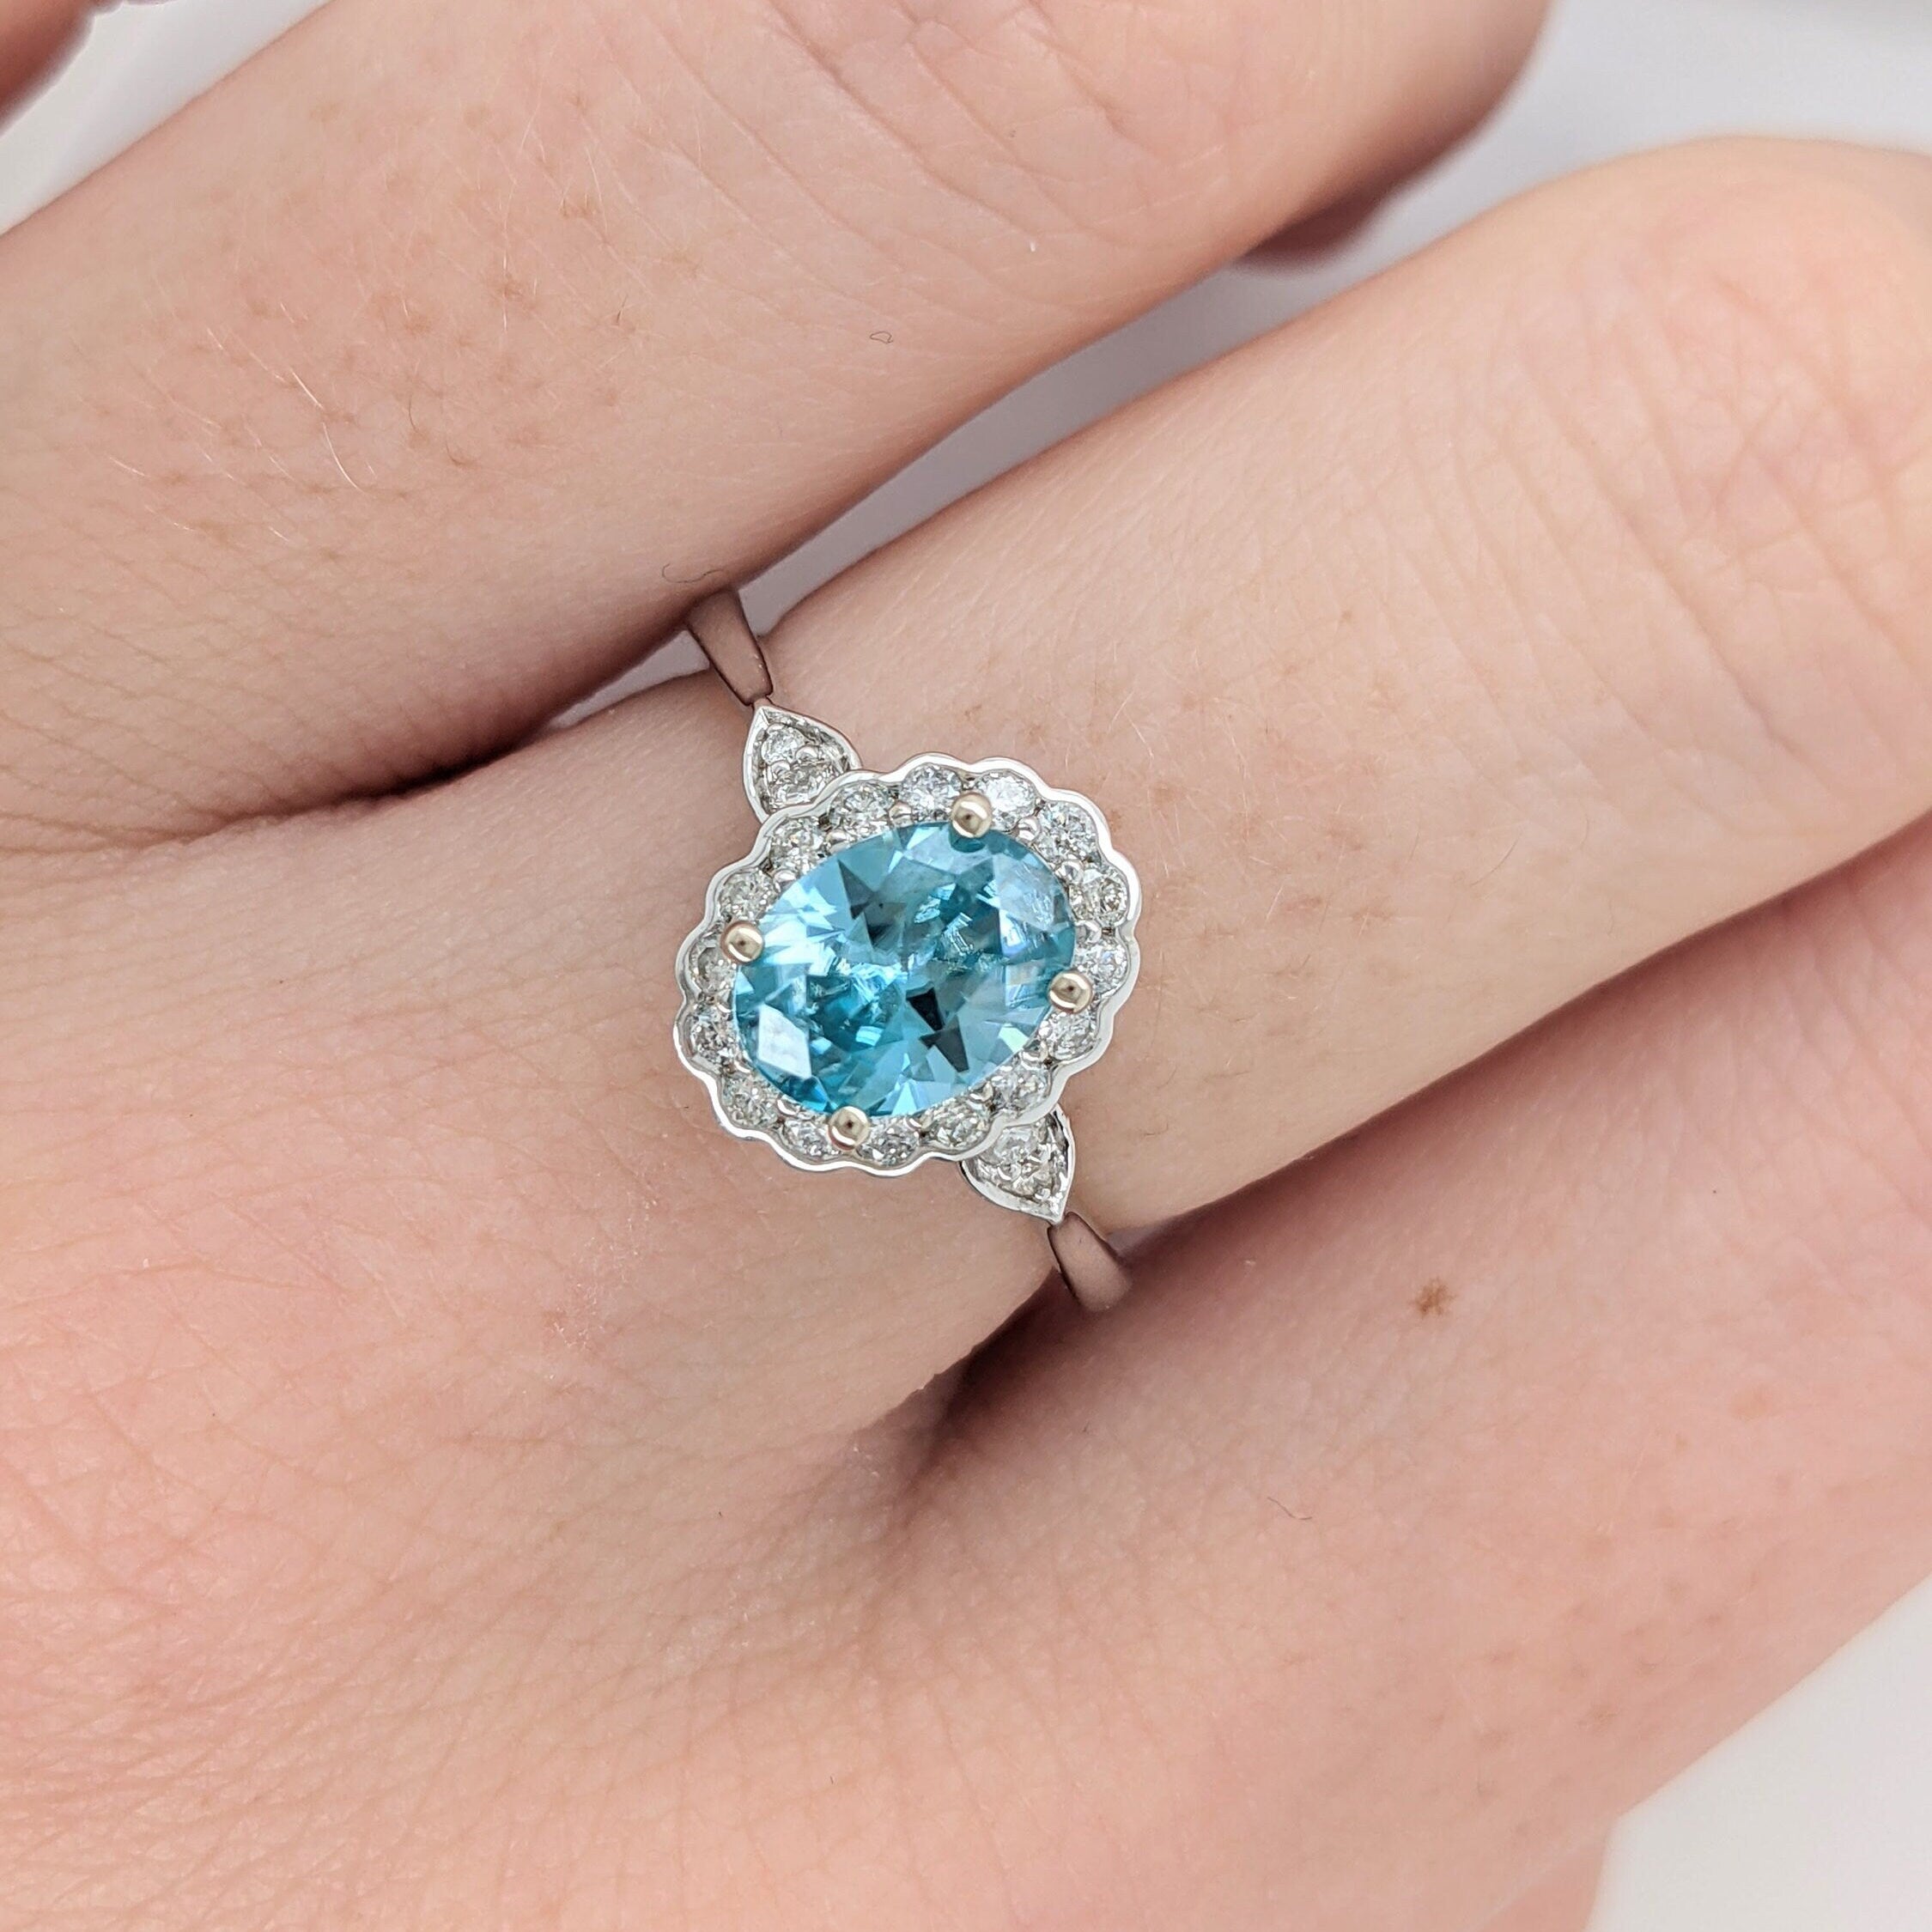 Vintage Inspired Blue Zircon Ring in 14K Gold w Diamond Accent Halo | Oval 8x6mm | Floral Halo | Art Deco | December Birthstone Ring